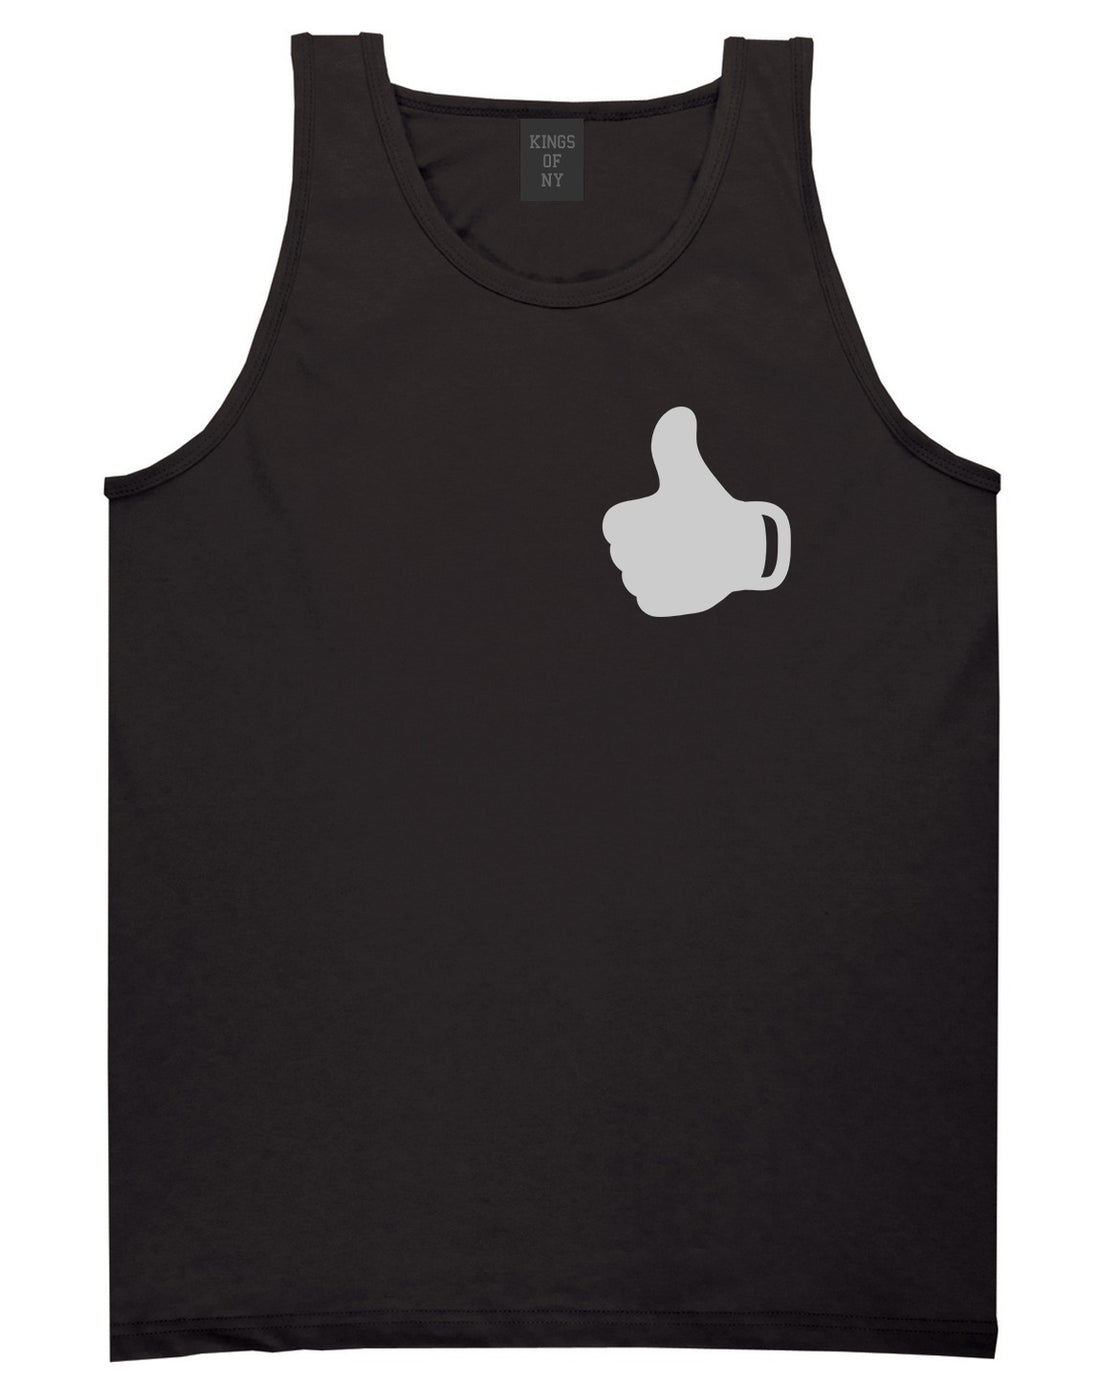 Thumbs Up Emoji Chest Black Tank Top Shirt by Kings Of NY